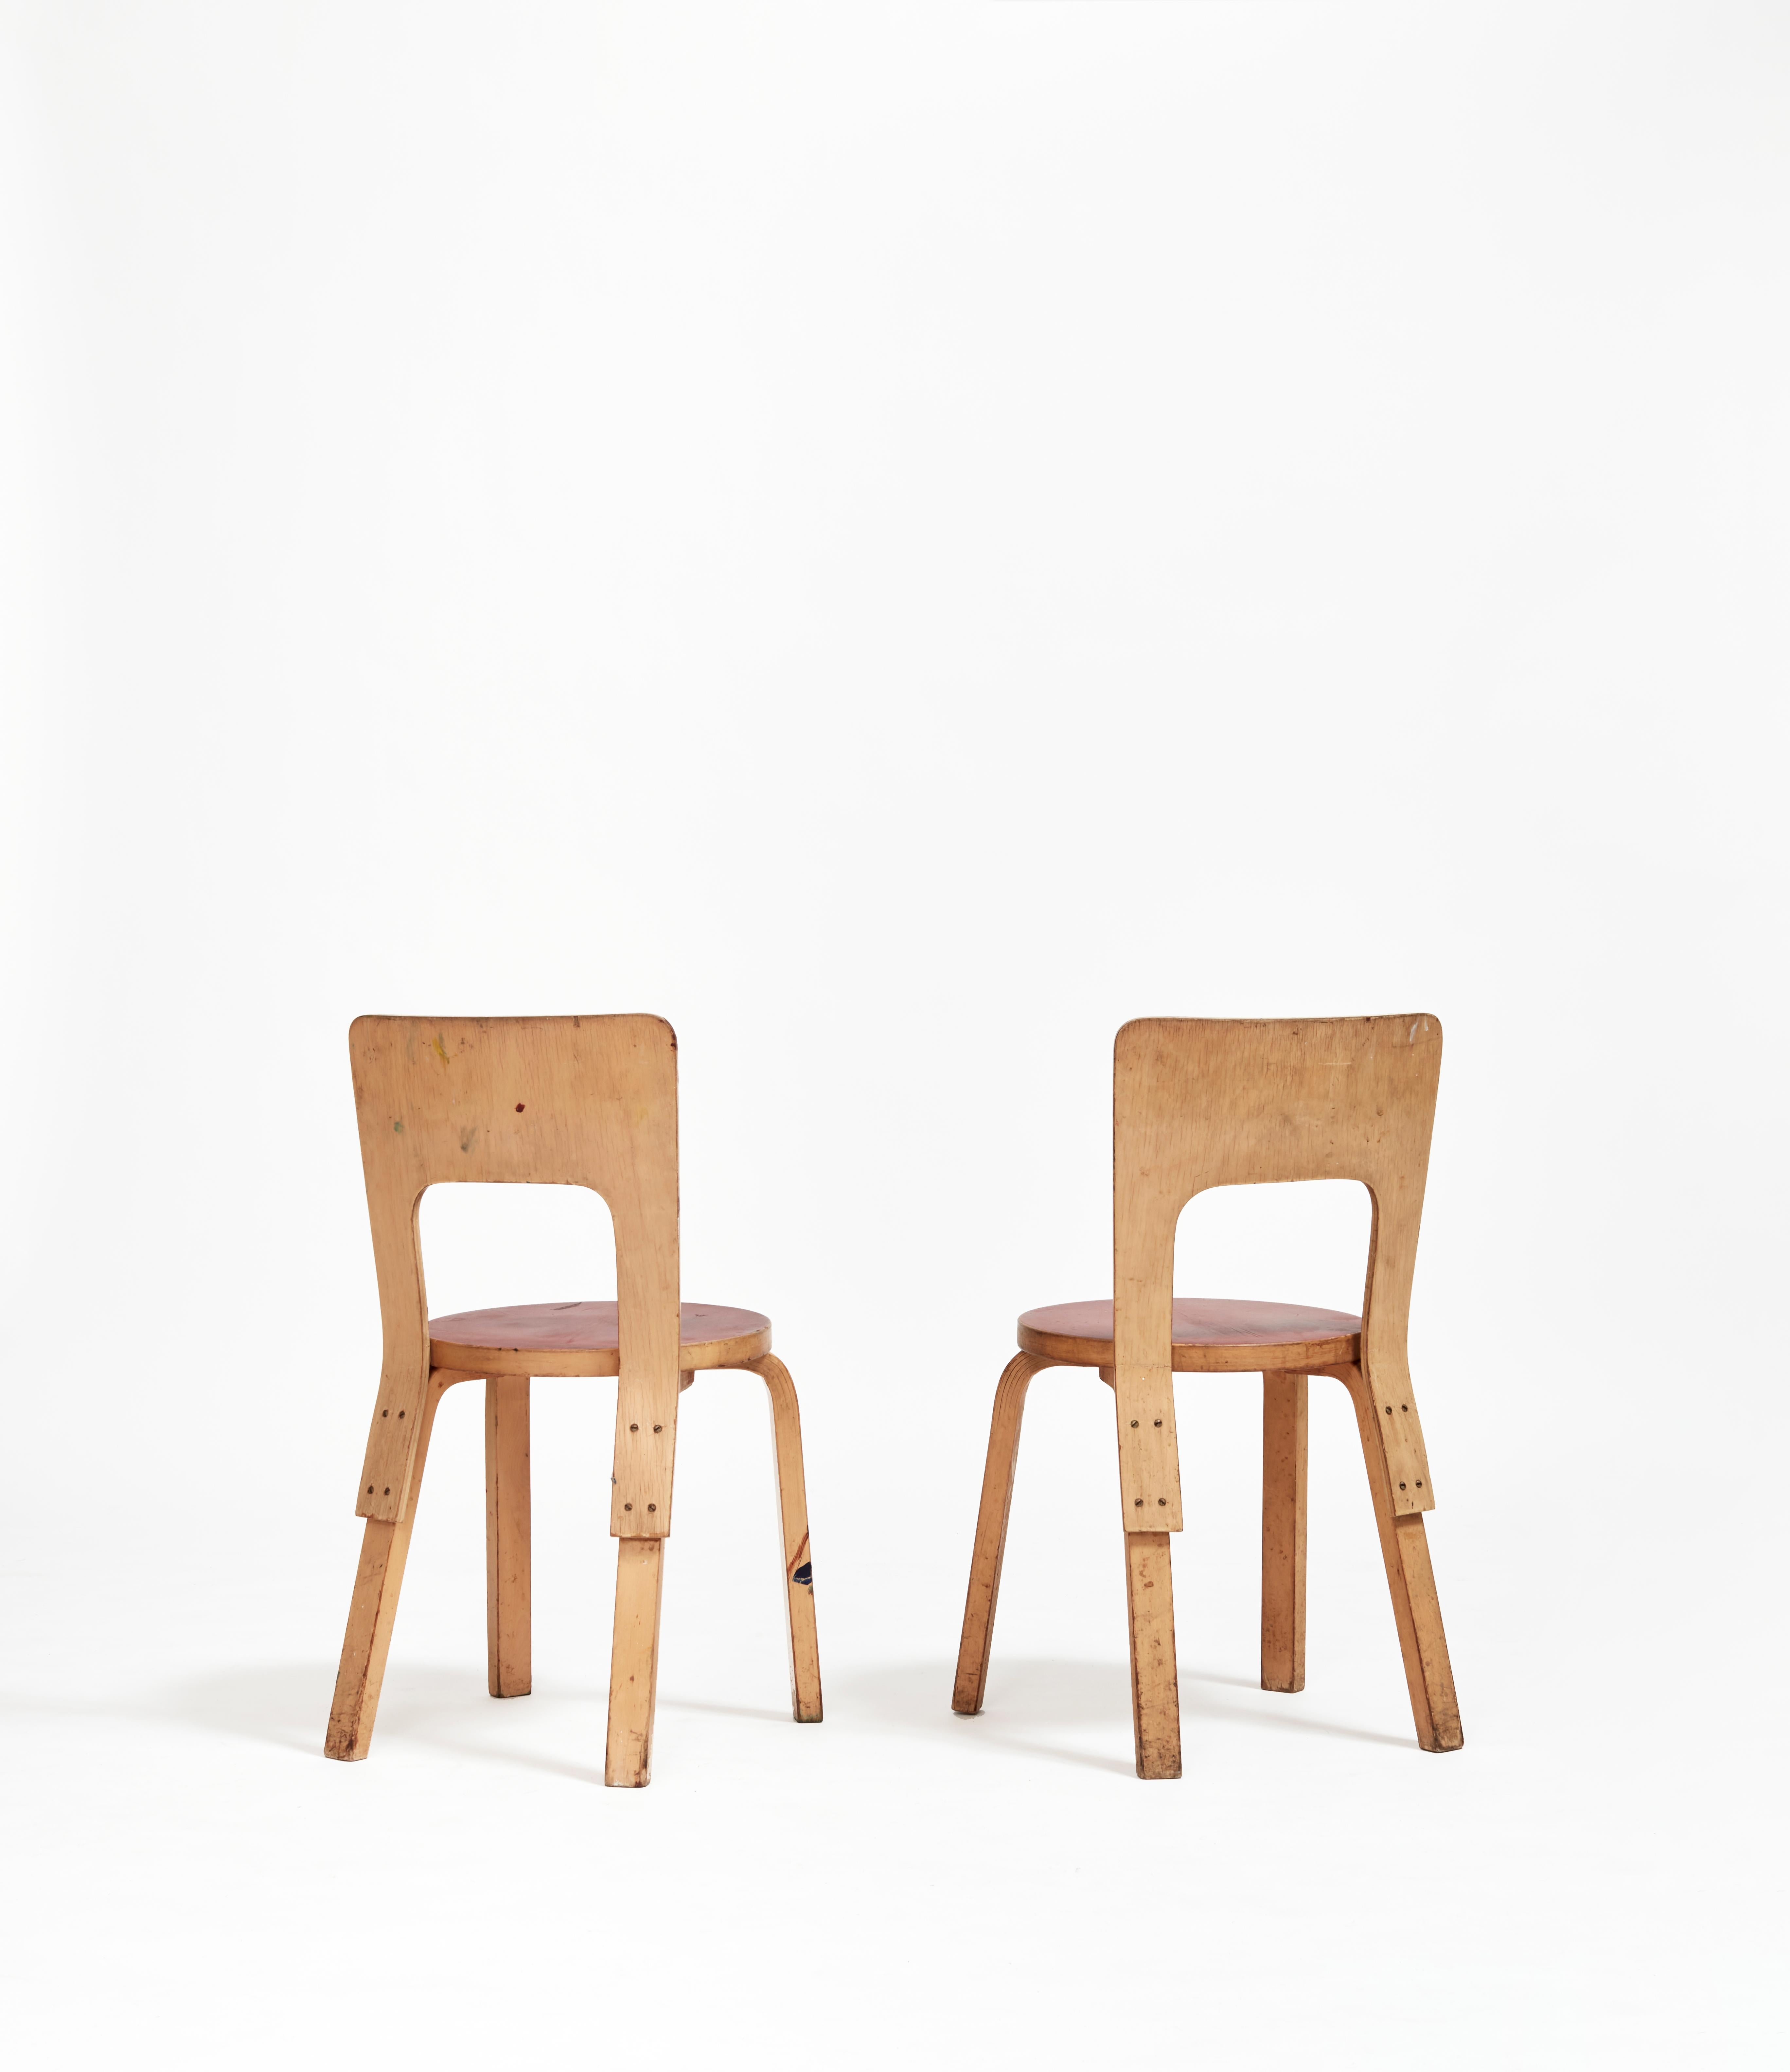 Model 65 encapsulates designer Alvar Aalto’s approach to systematic, rational design within the context of Finnish minimalism; showcasing clean lines and his favoured use of birchwood.The bolts, showcased along the back legs, imbued the chair with